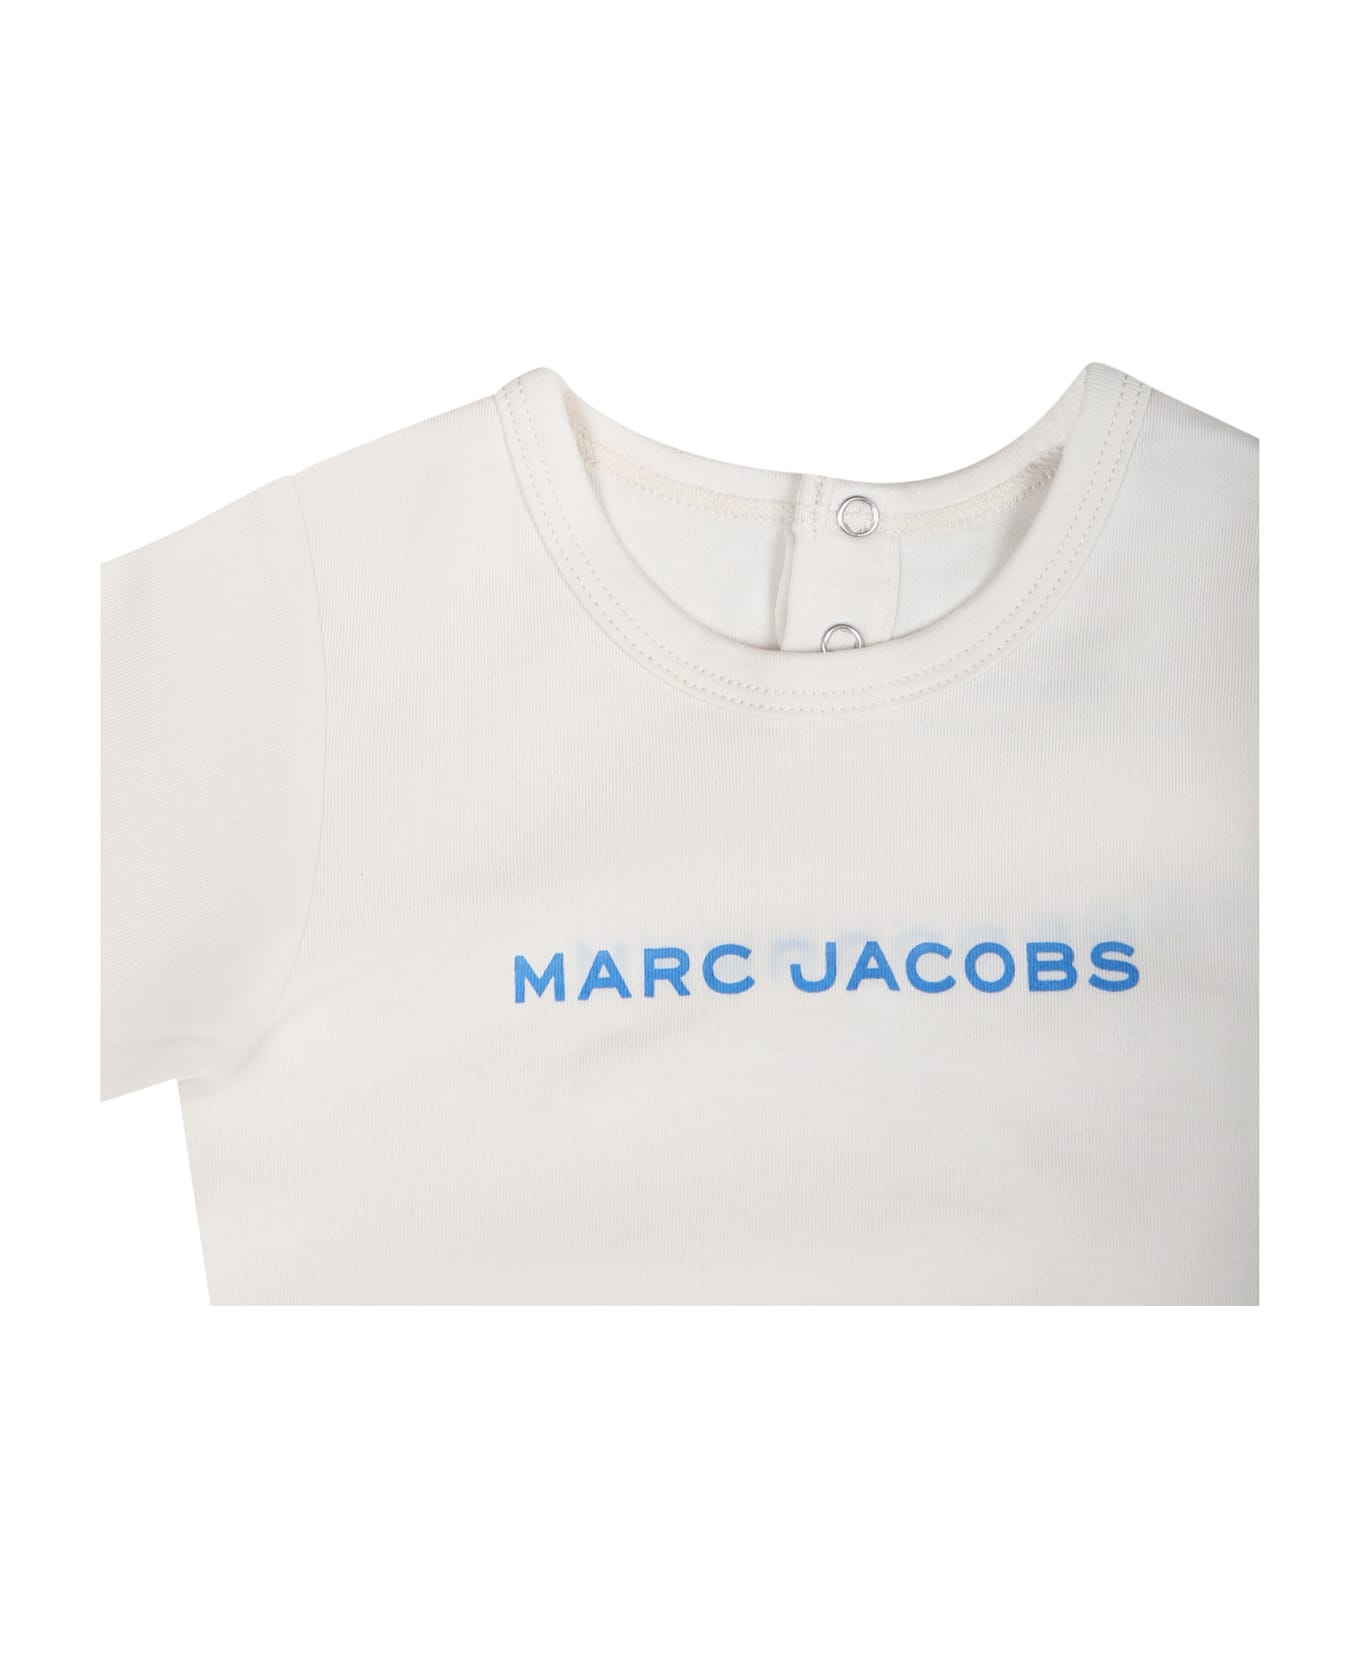 Marc Jacobs Blue Sports Outfit For Newborns With Logo - Light Blue